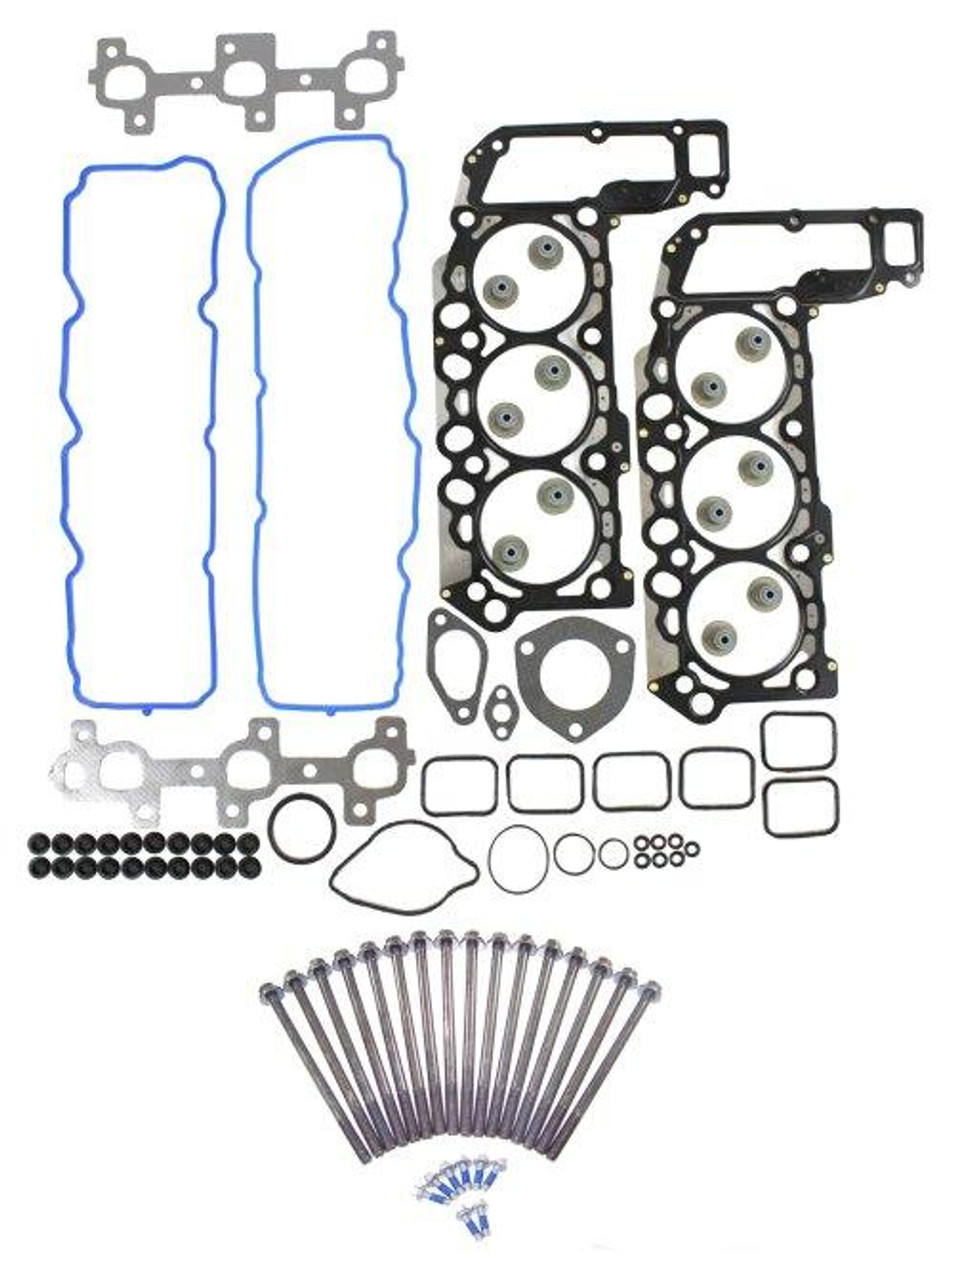 Head Gasket Set with Head Bolt Kit - 2010 Jeep Grand Cherokee 3.7L Engine Parts # HGB1106ZE33